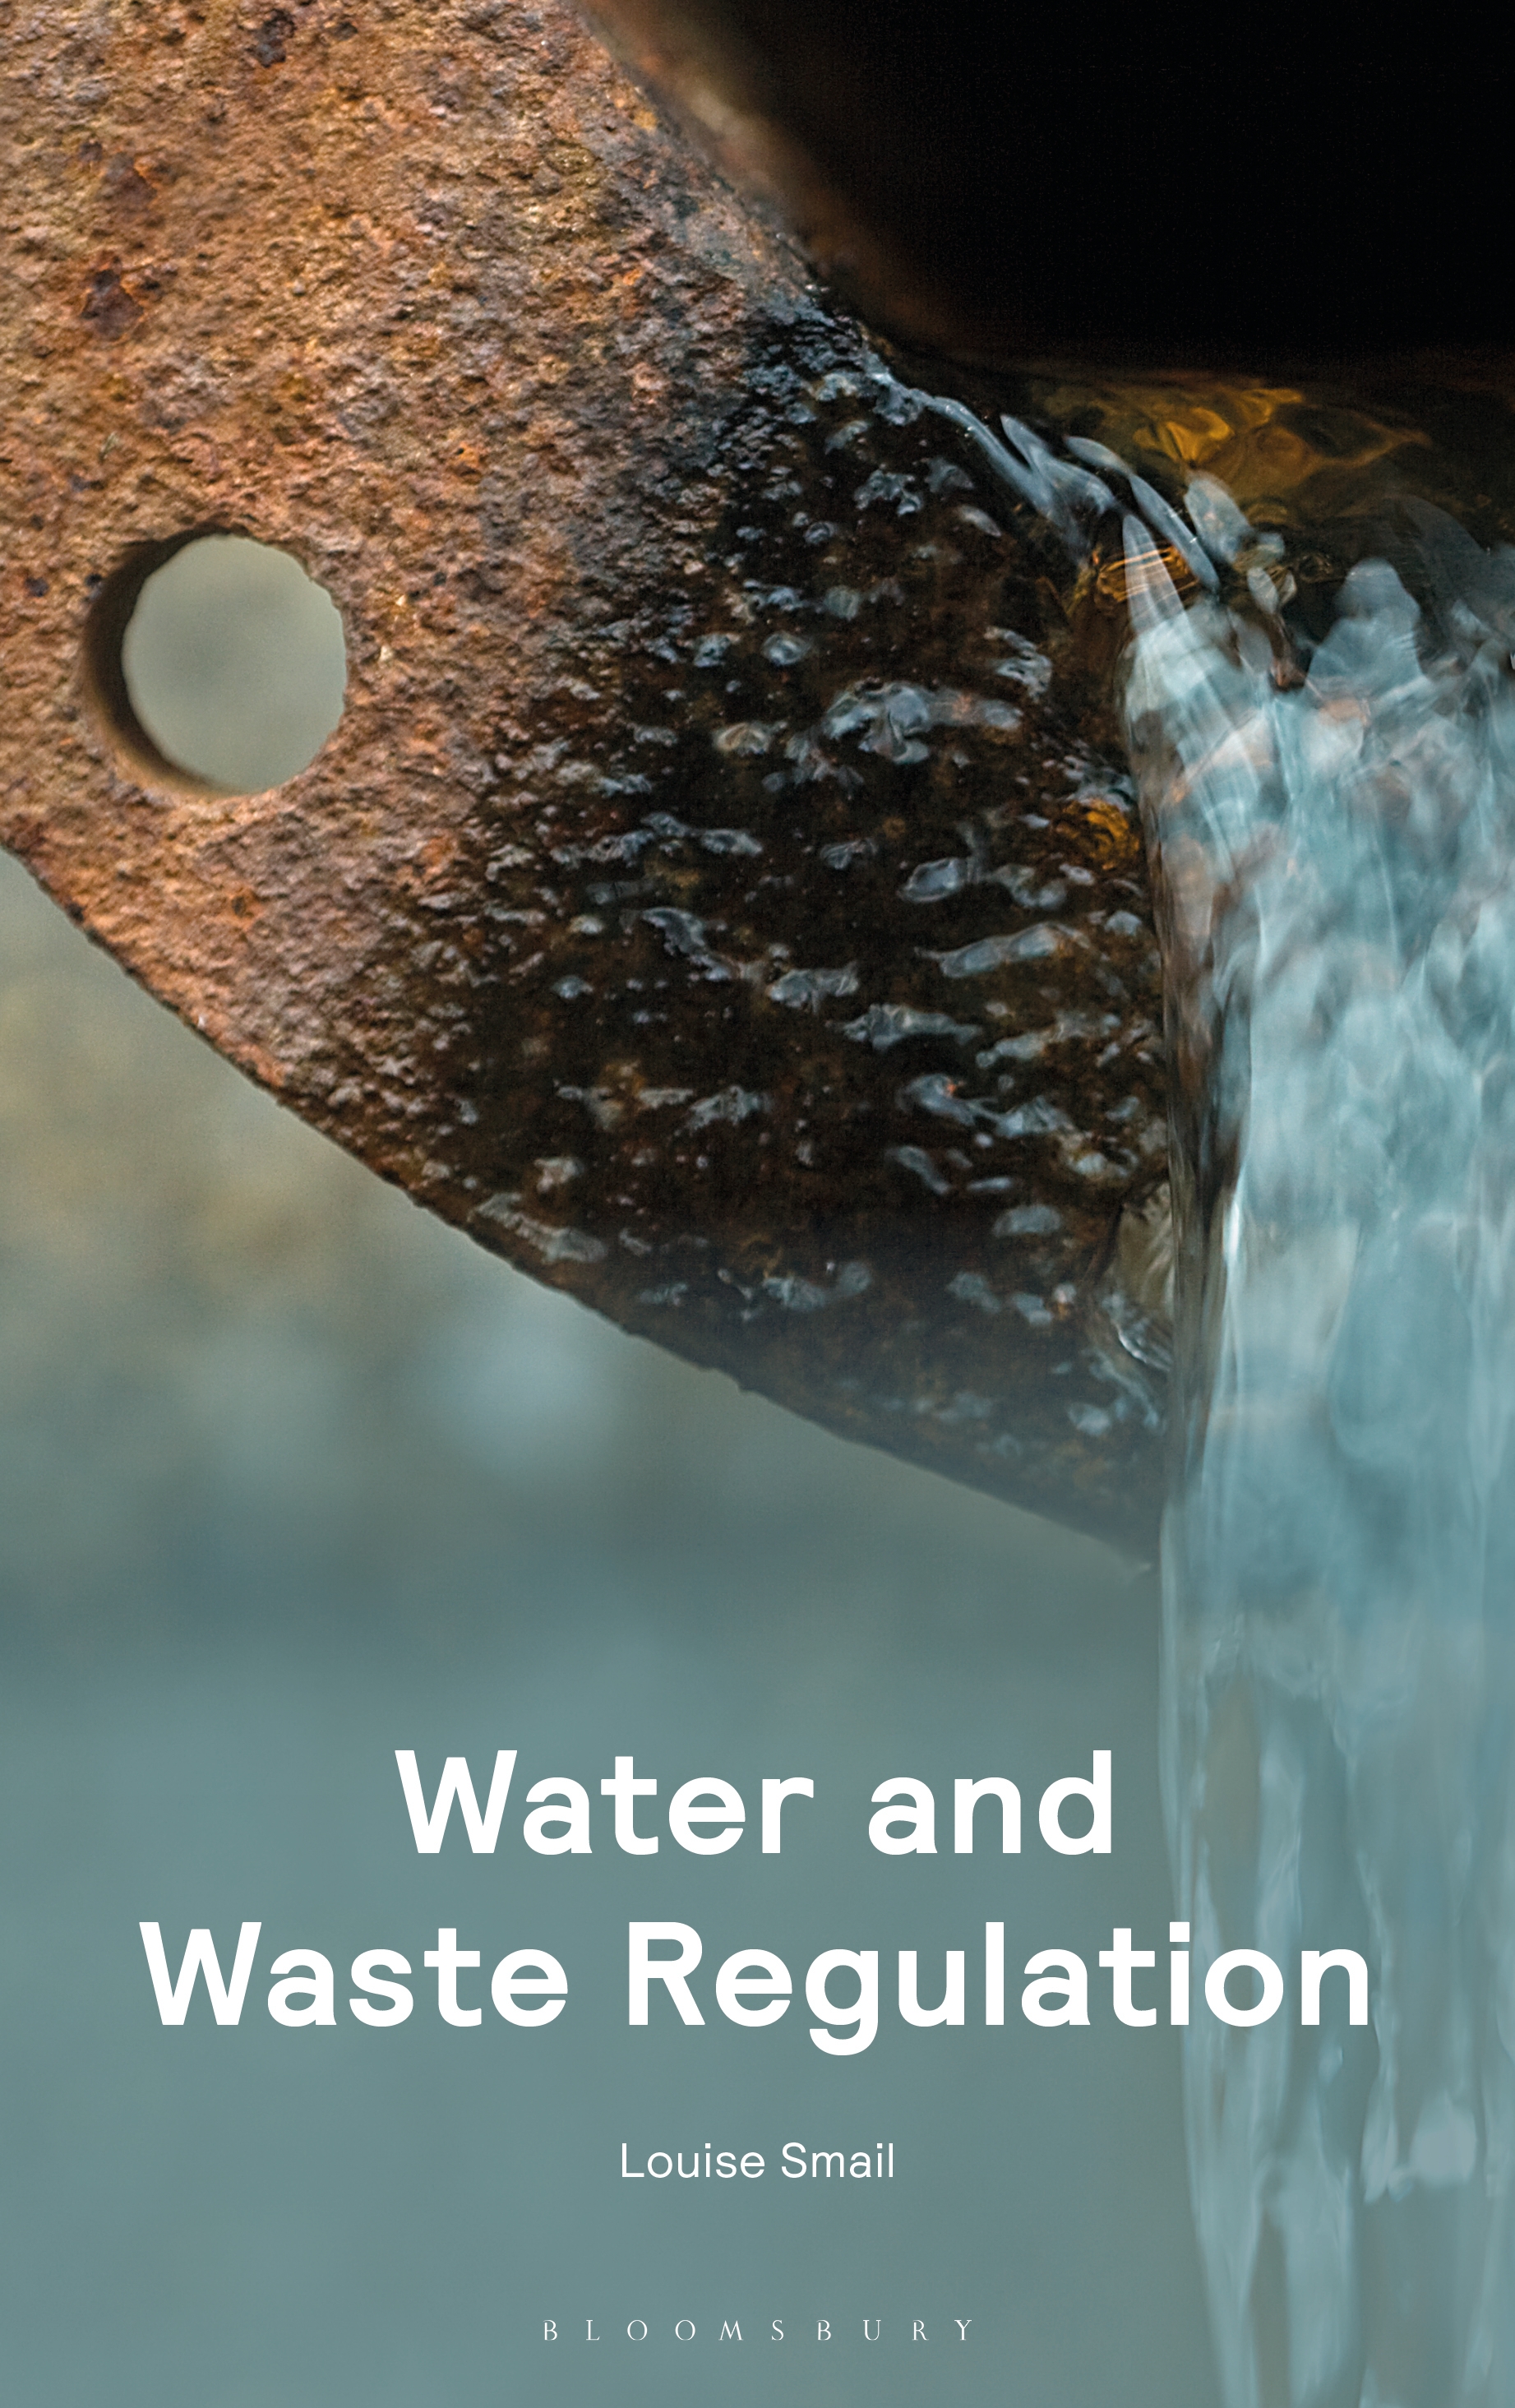 Water and Waste Regulation book jacket